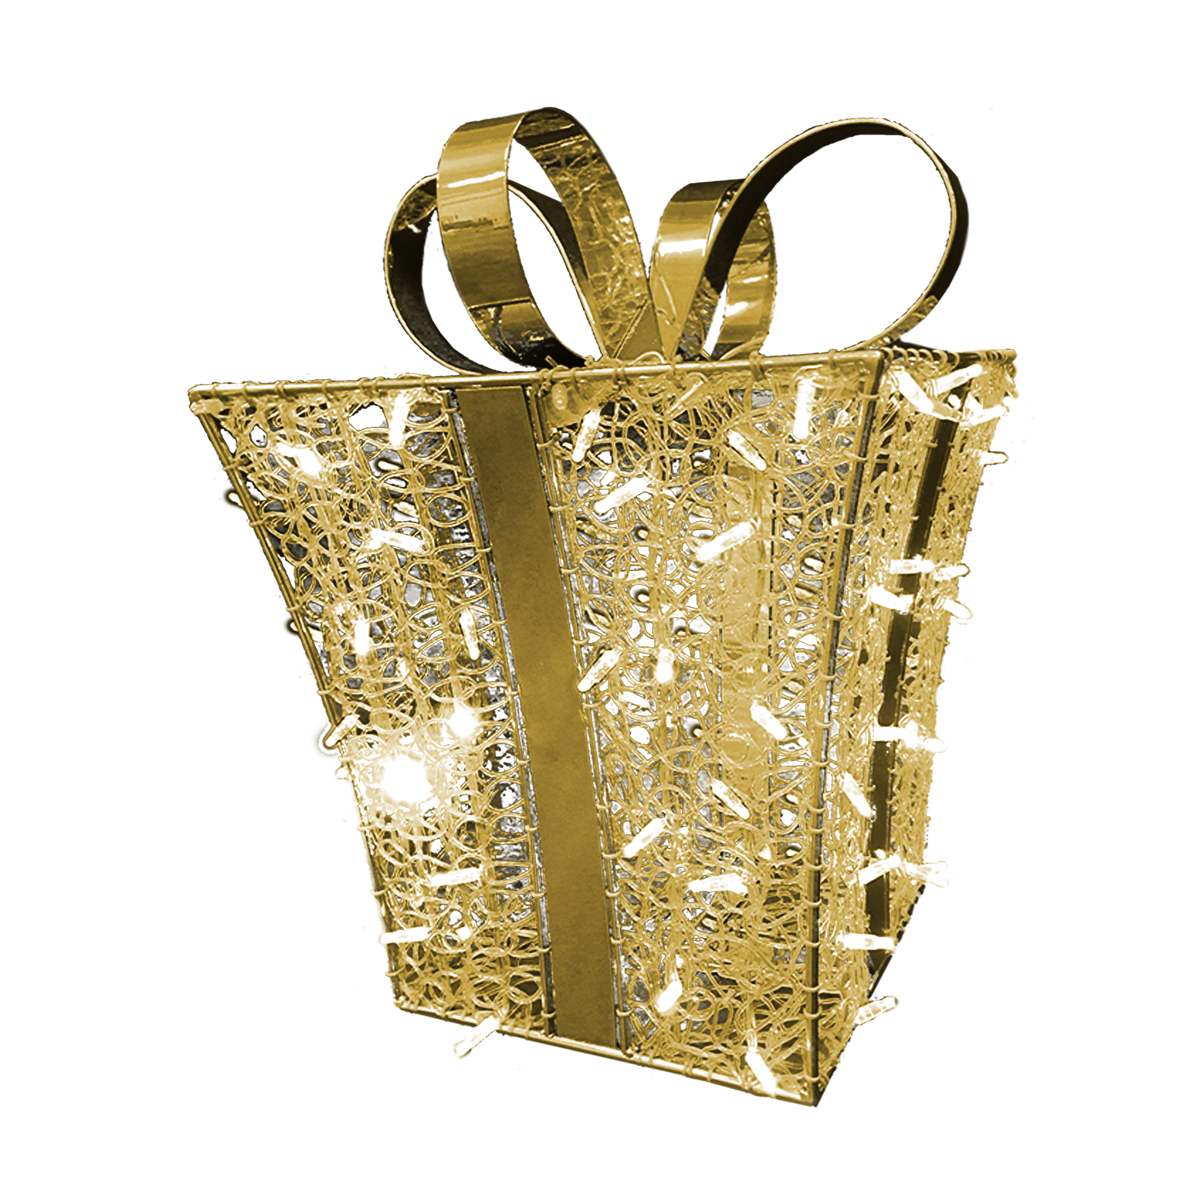 3D Square Gift Box - 3.4ft Tall - Christmas Display - Gold